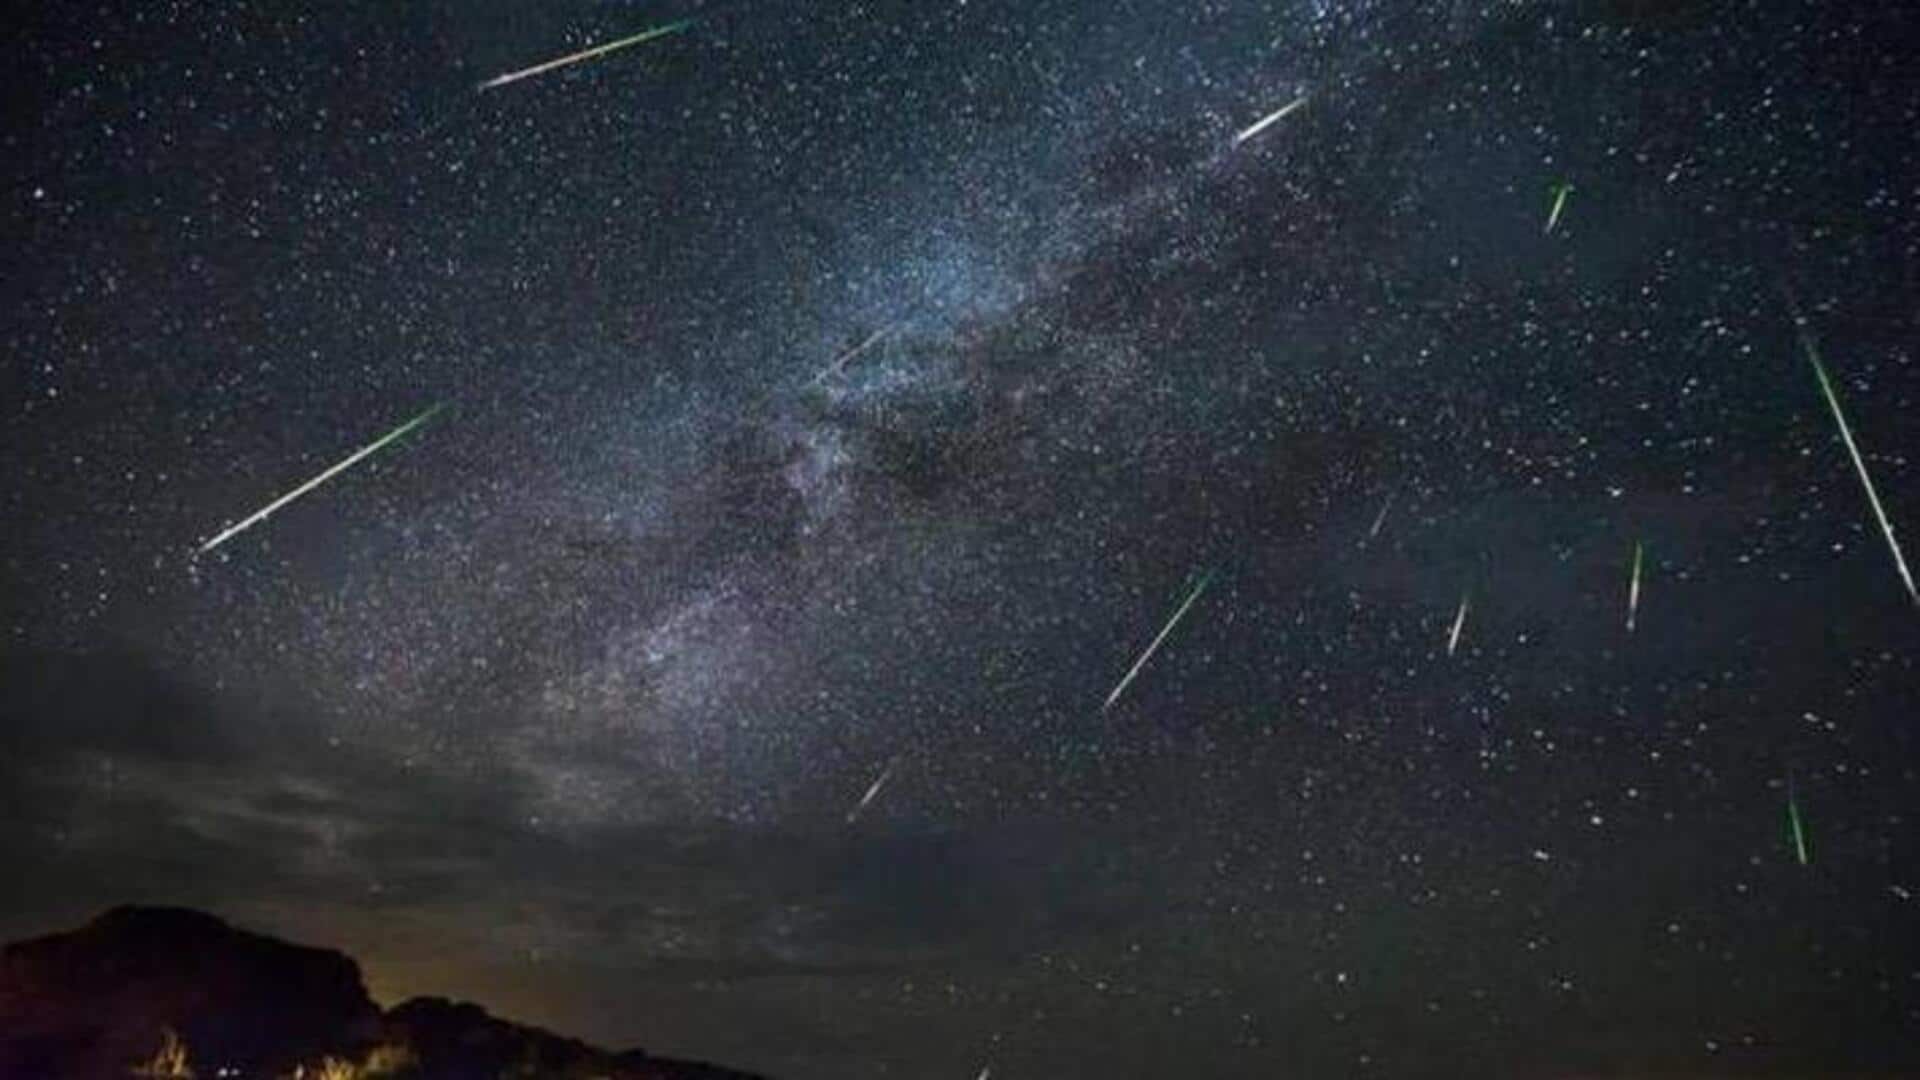 Quadrantids meteor shower starts tomorrow: When and how to watch